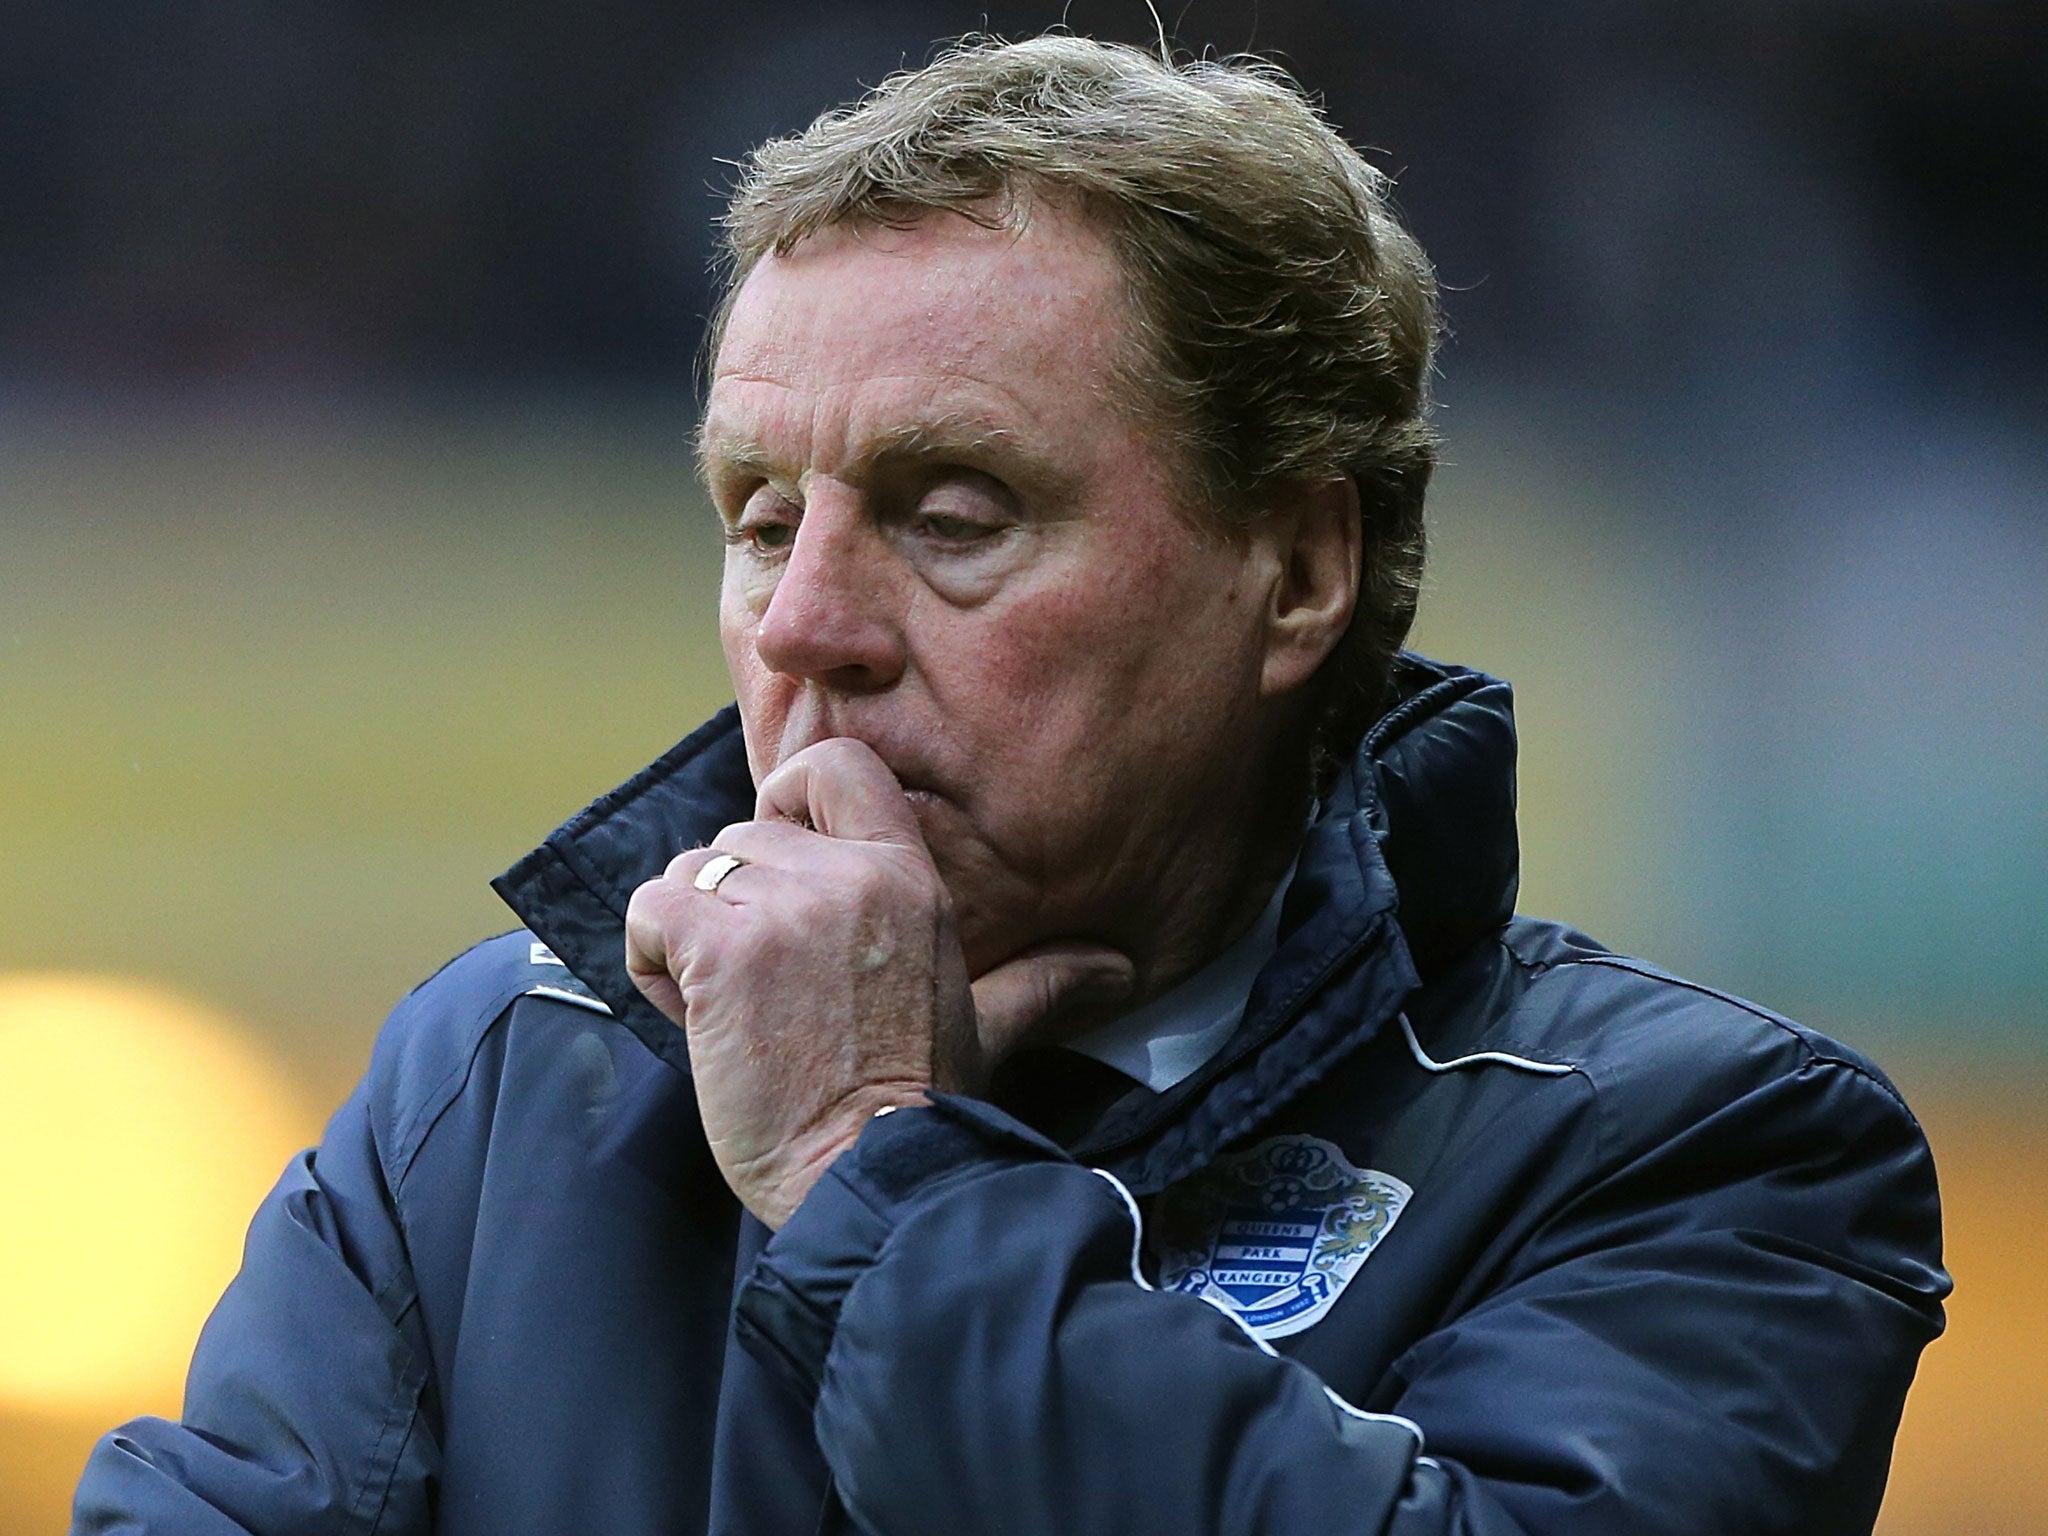 Harry Redknapp is accused of speeding at 38mph in a 30mph zone